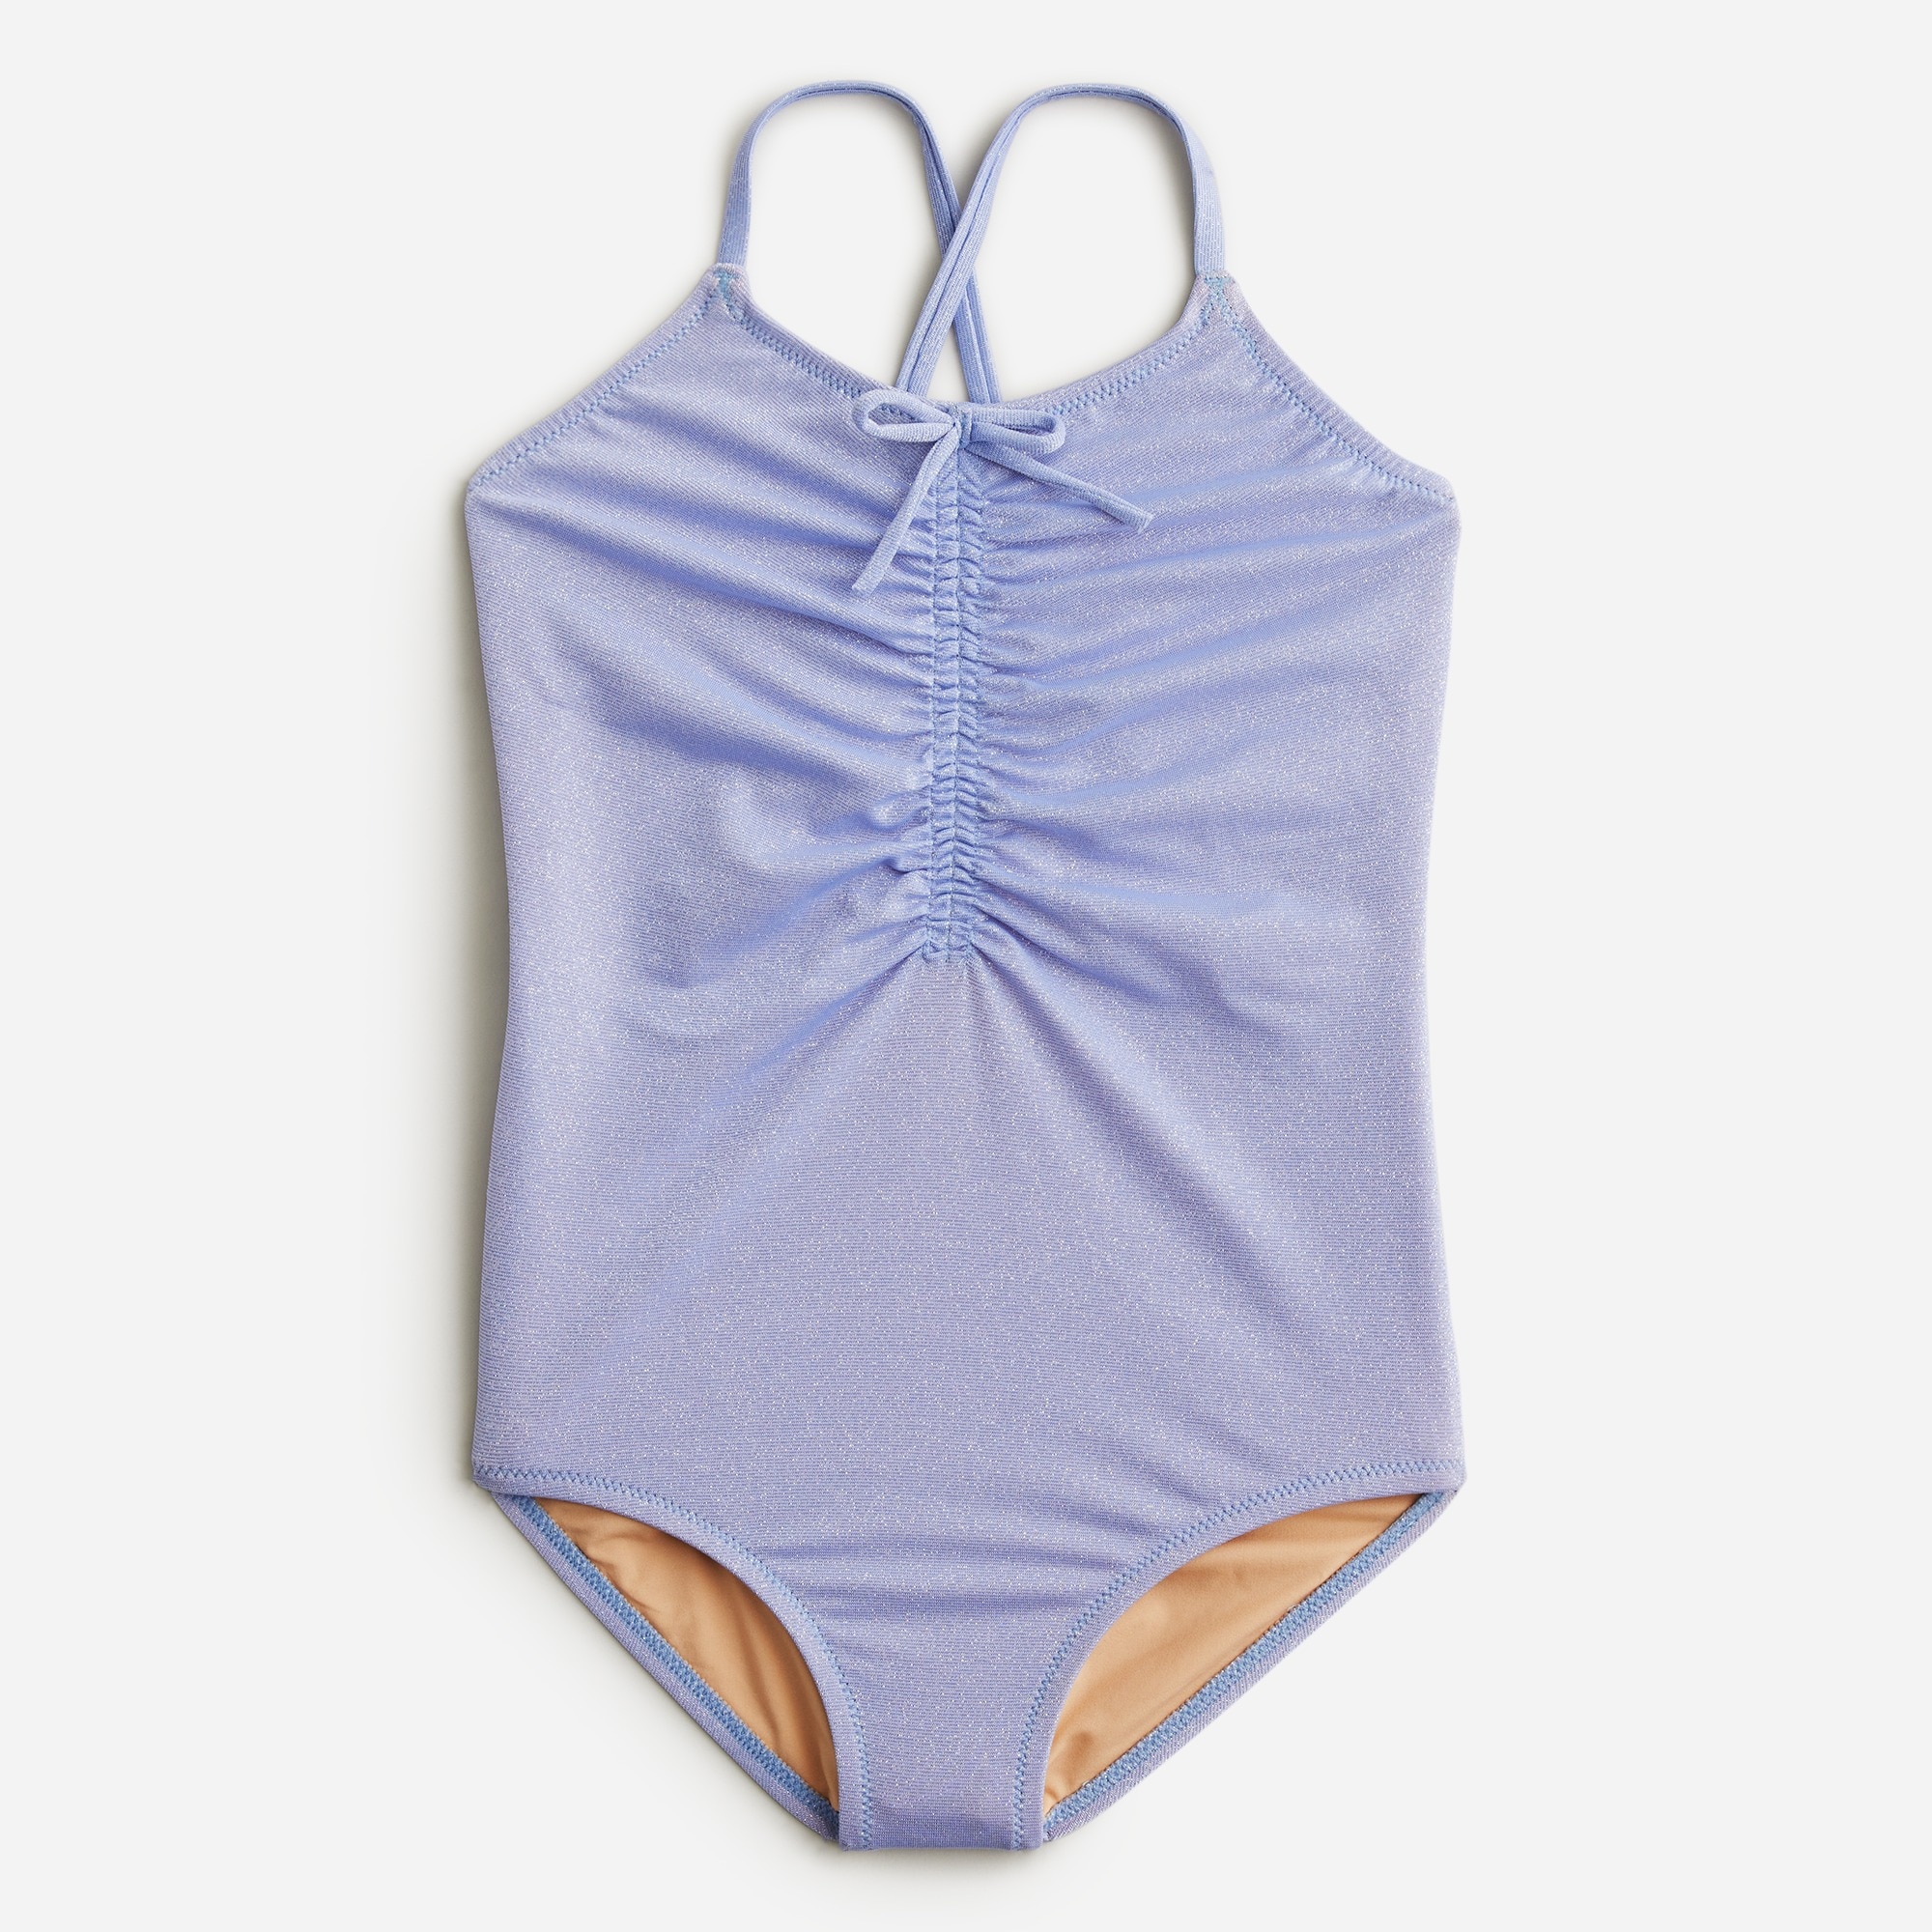  Girls' ruched shimmer one-piece swimsuit with UPF 50+